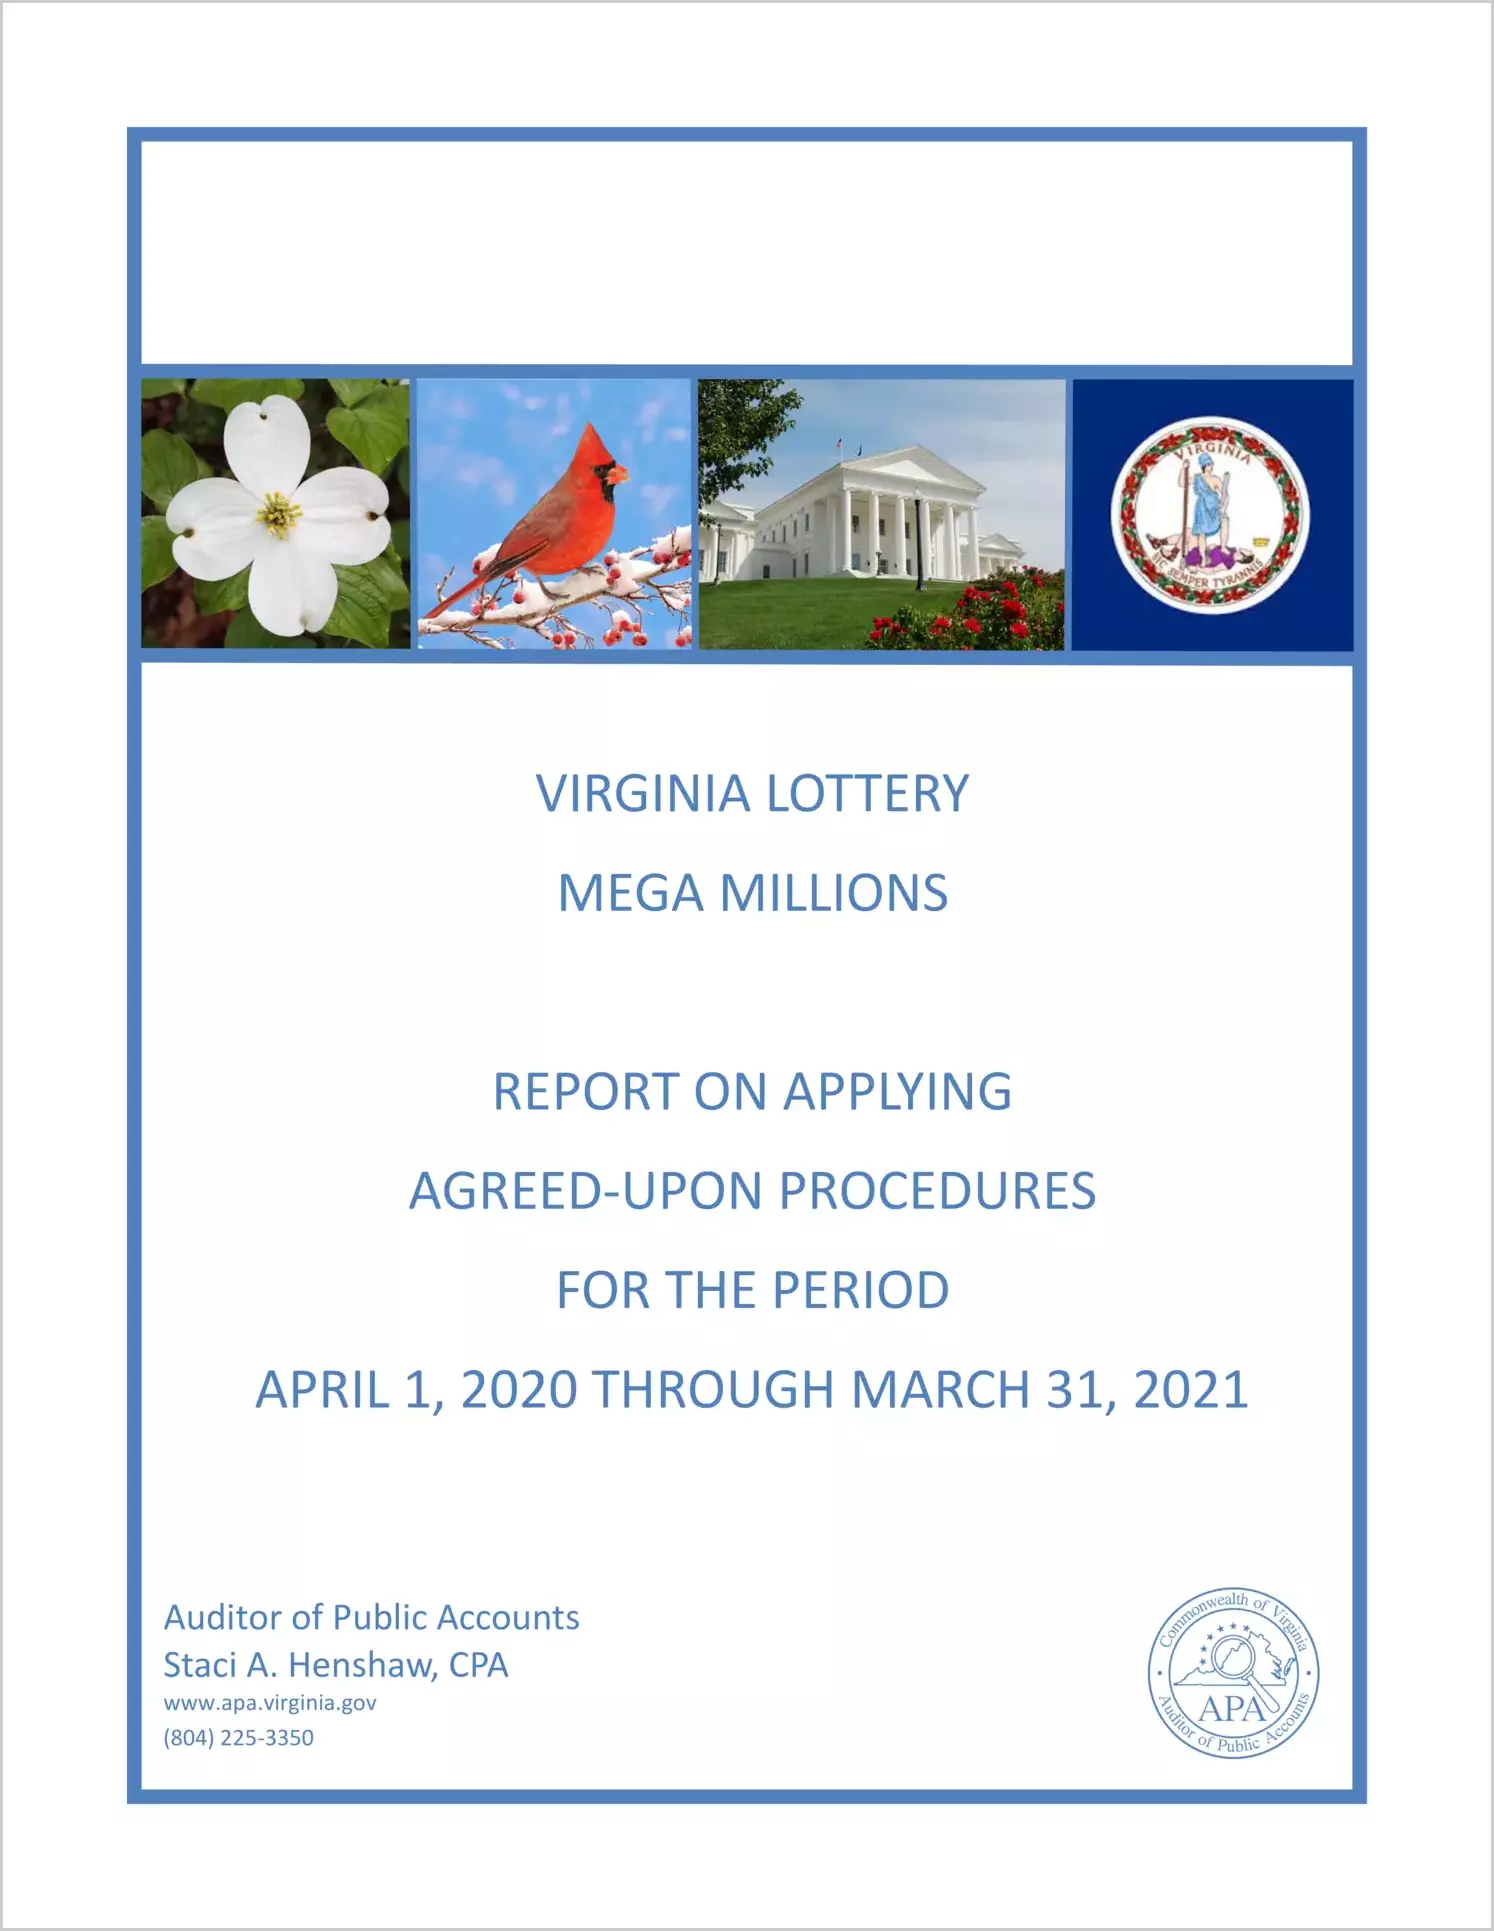 Virginia Lottery Mega Millions Report on Applying Agreed-Upon Procedures for the period April 1, 2020 through March 31, 2021